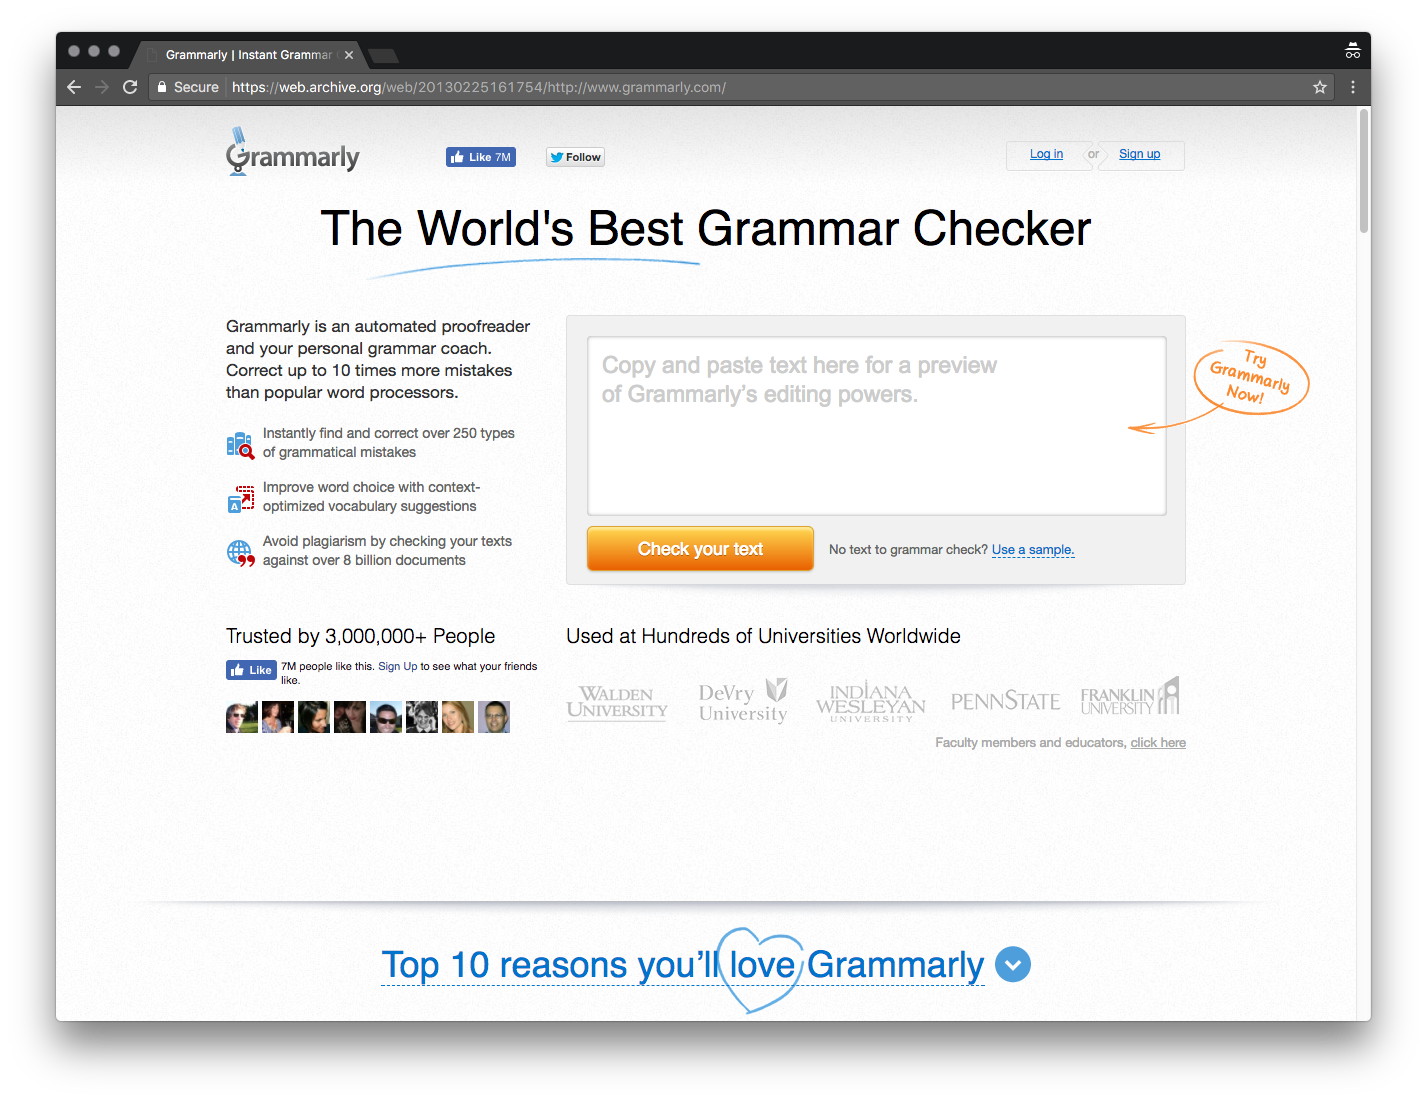 What Does Grammarly Promotions April Mean?